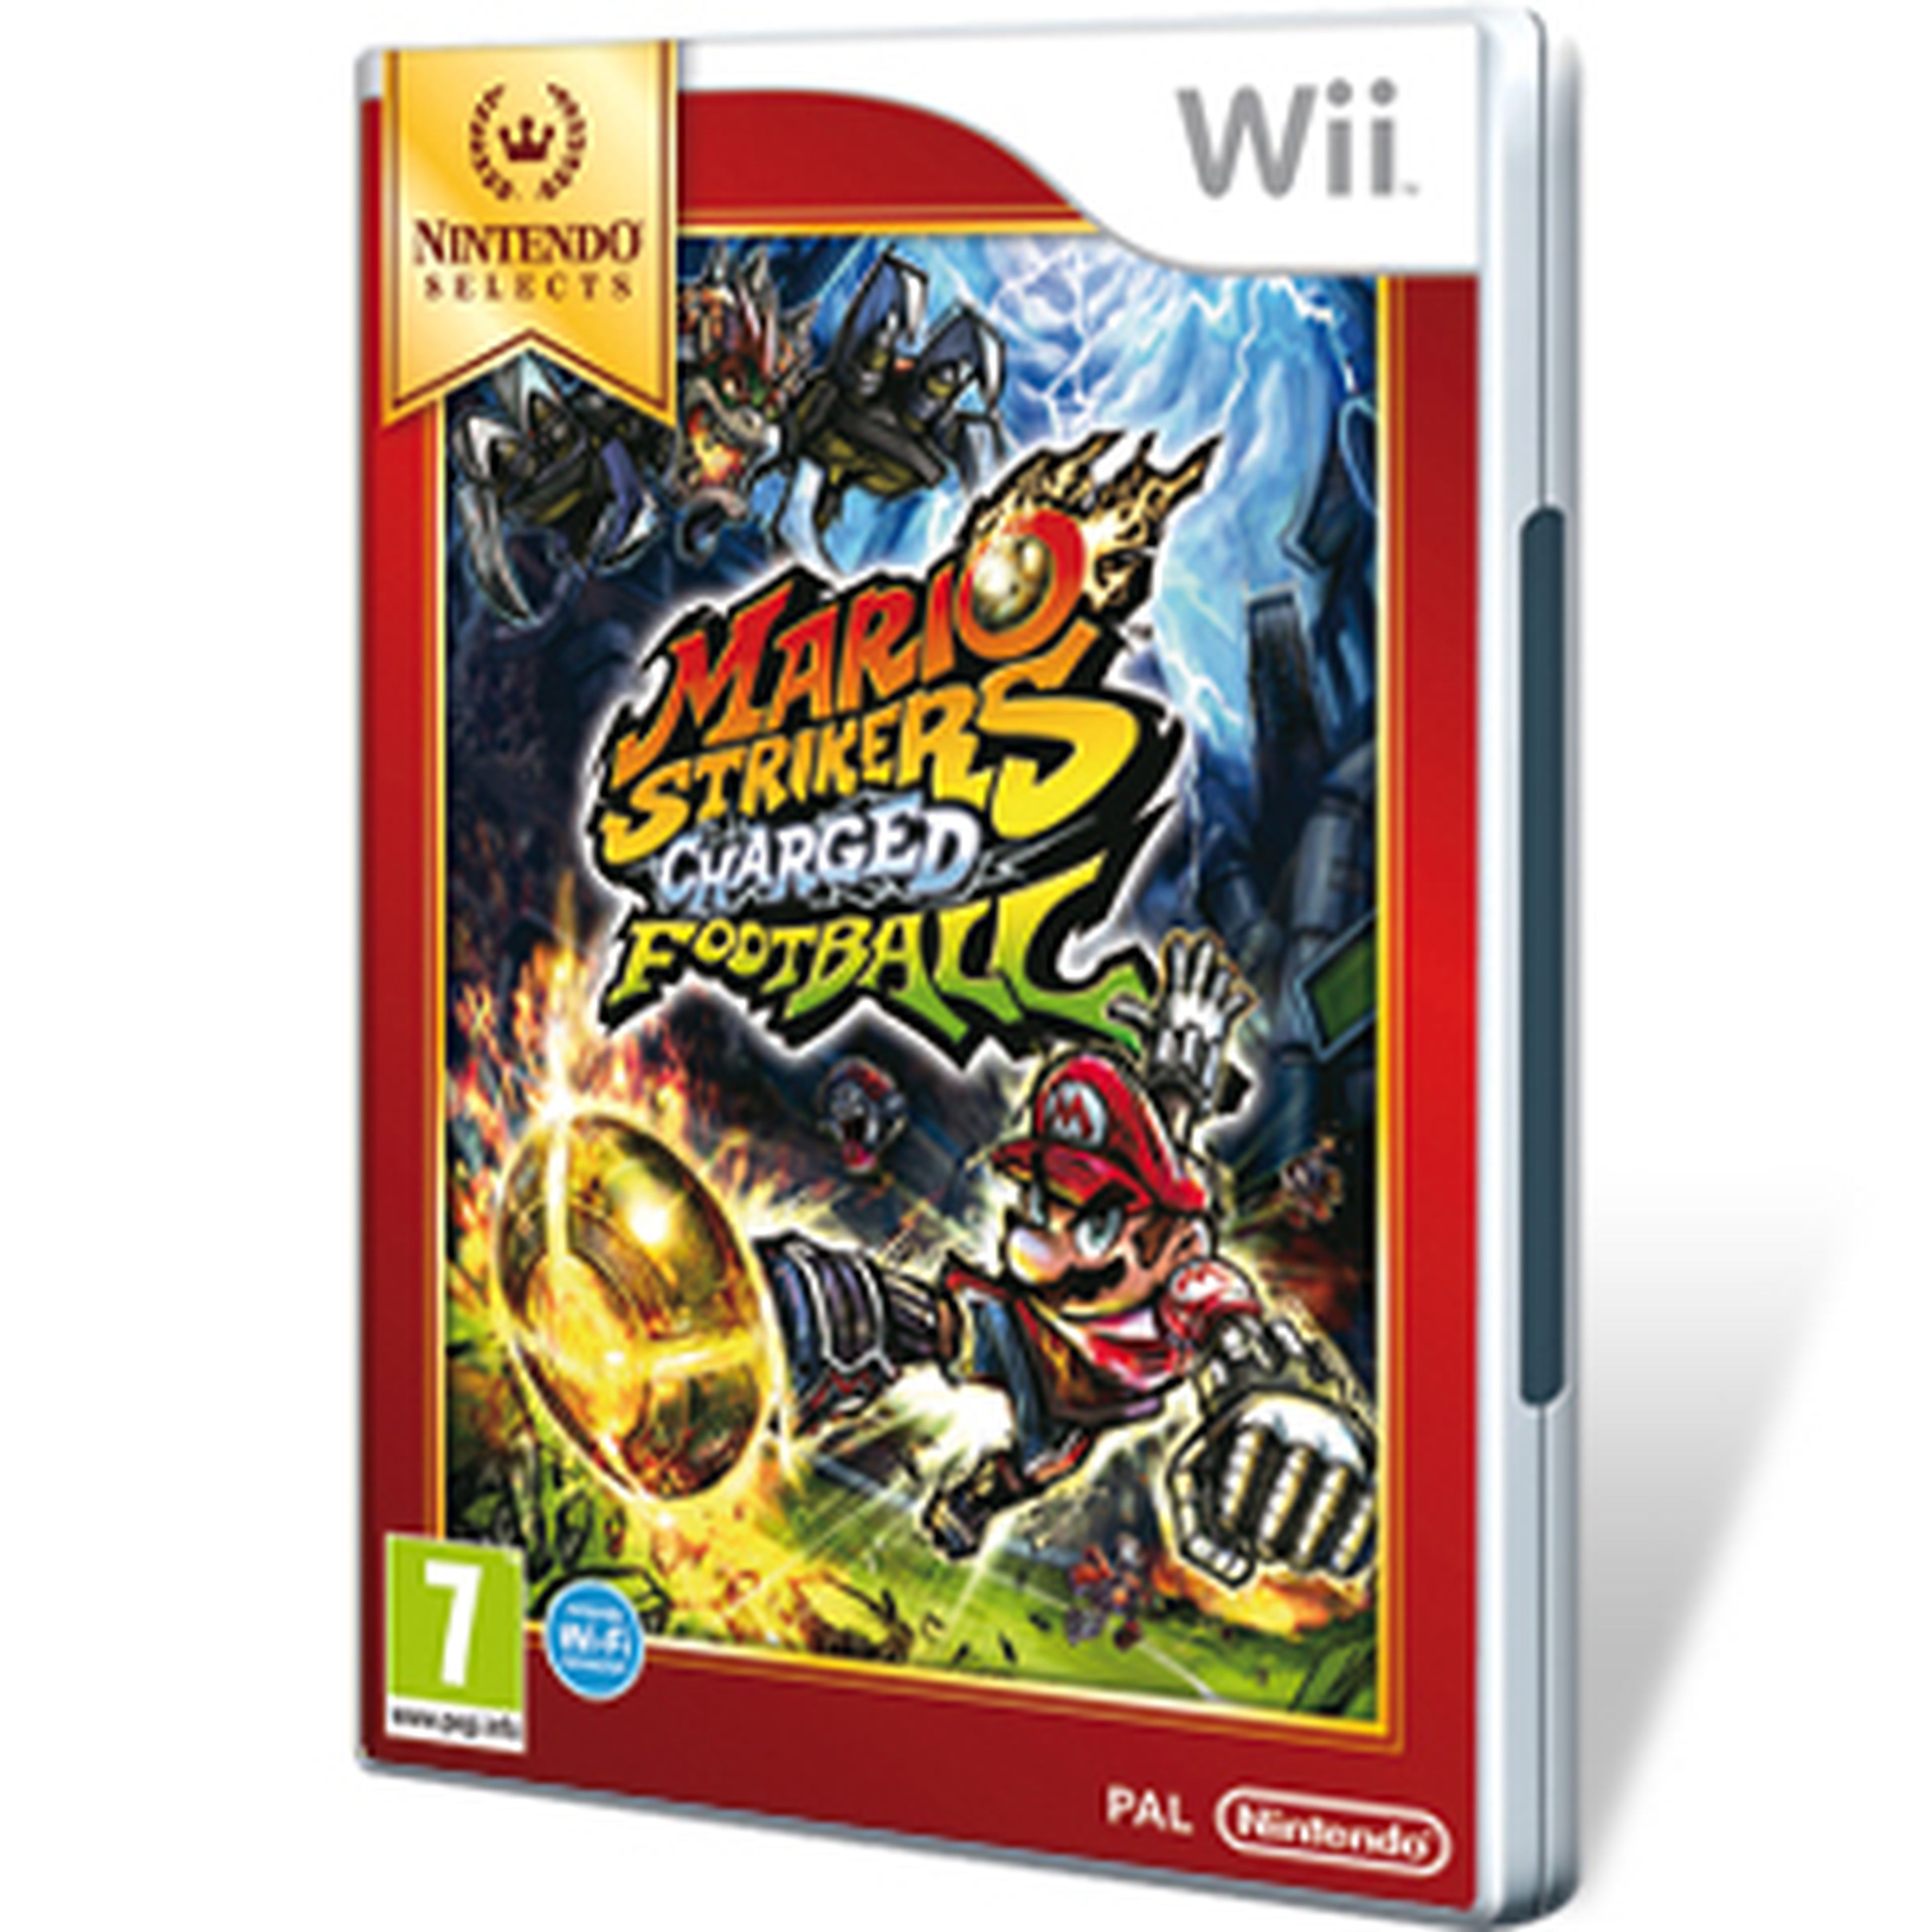 Mario Strikers Charged Football para Wii